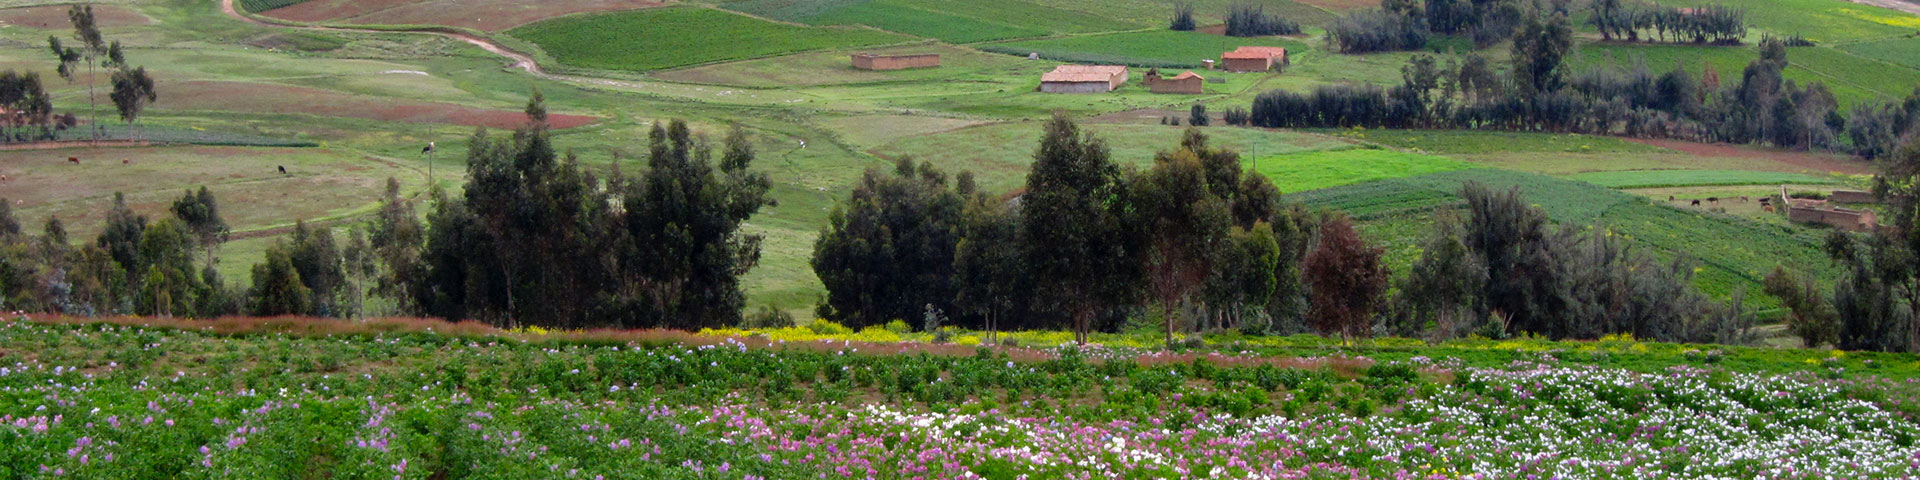 A field of potatoes in flower in undulating countryside.